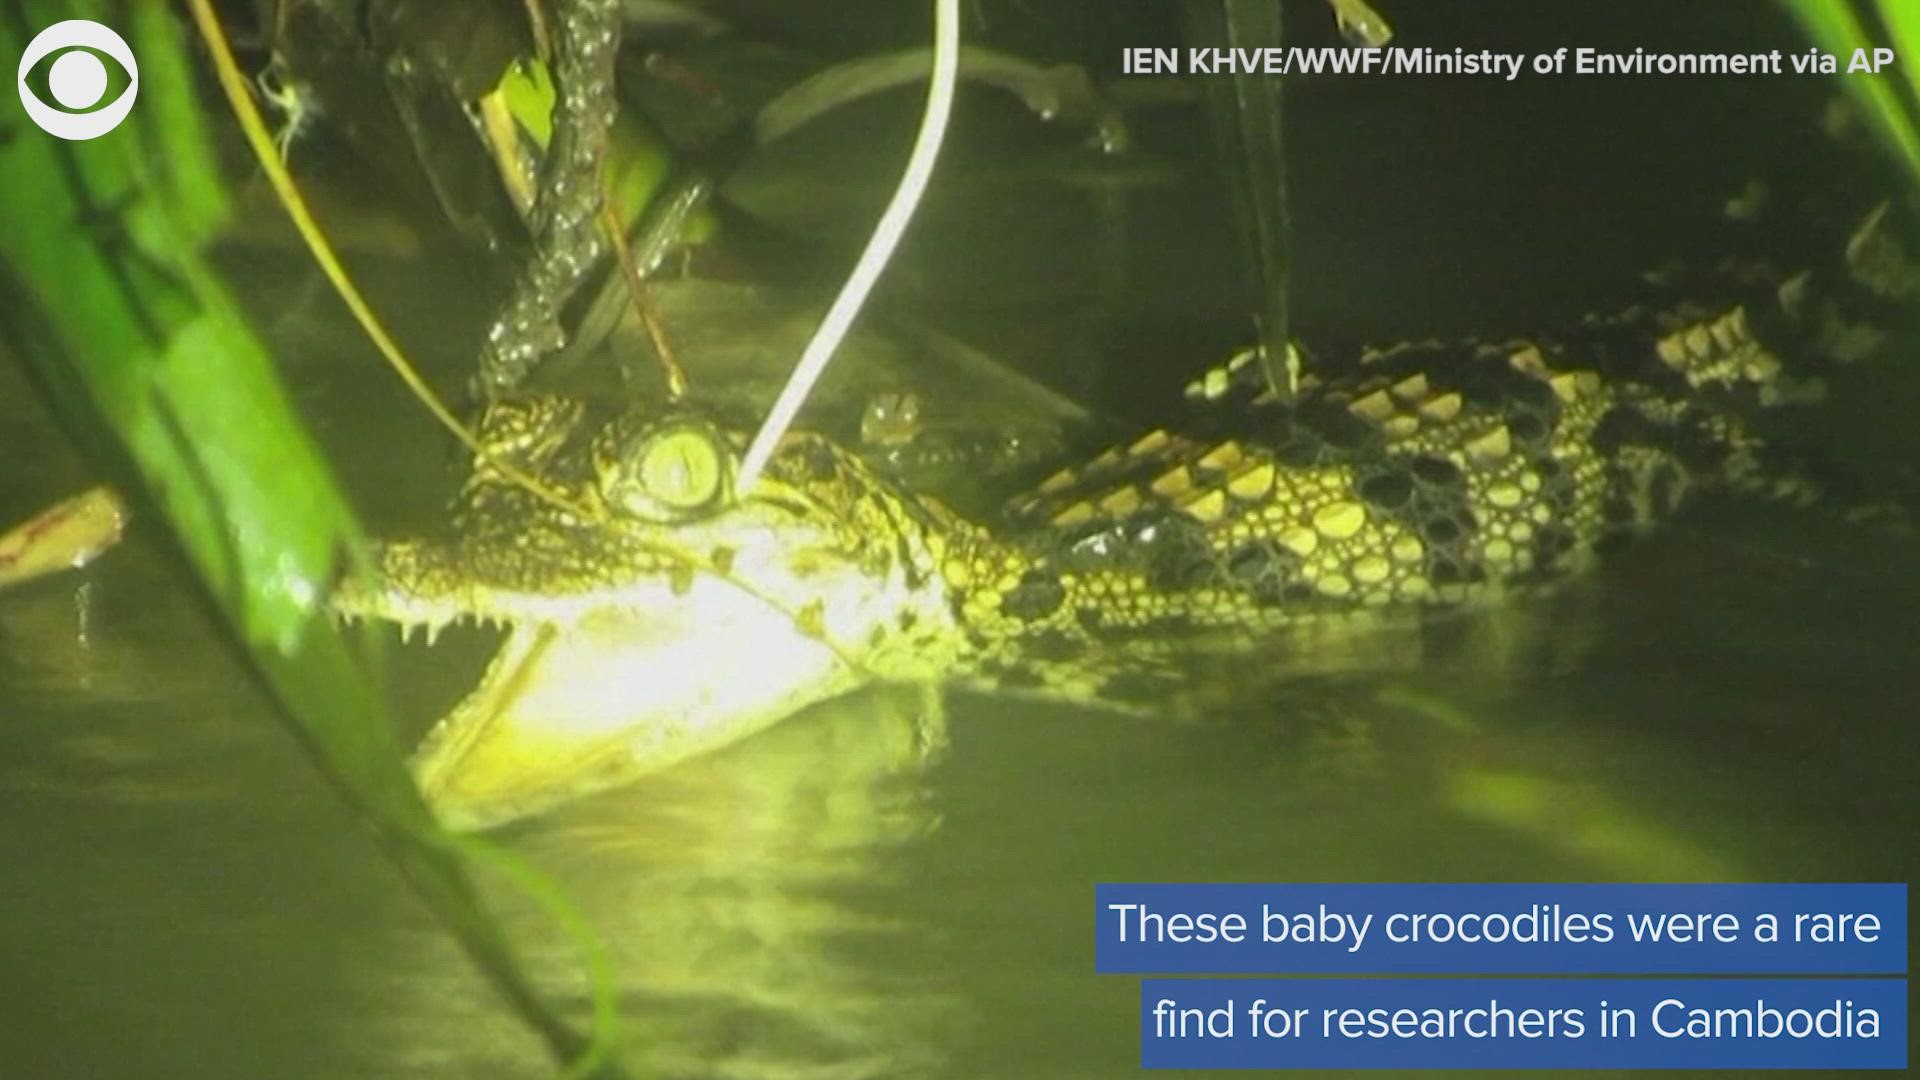 Researchers in Cambodia found hatchlings of one of the world’s rarest reptiles. Take a look